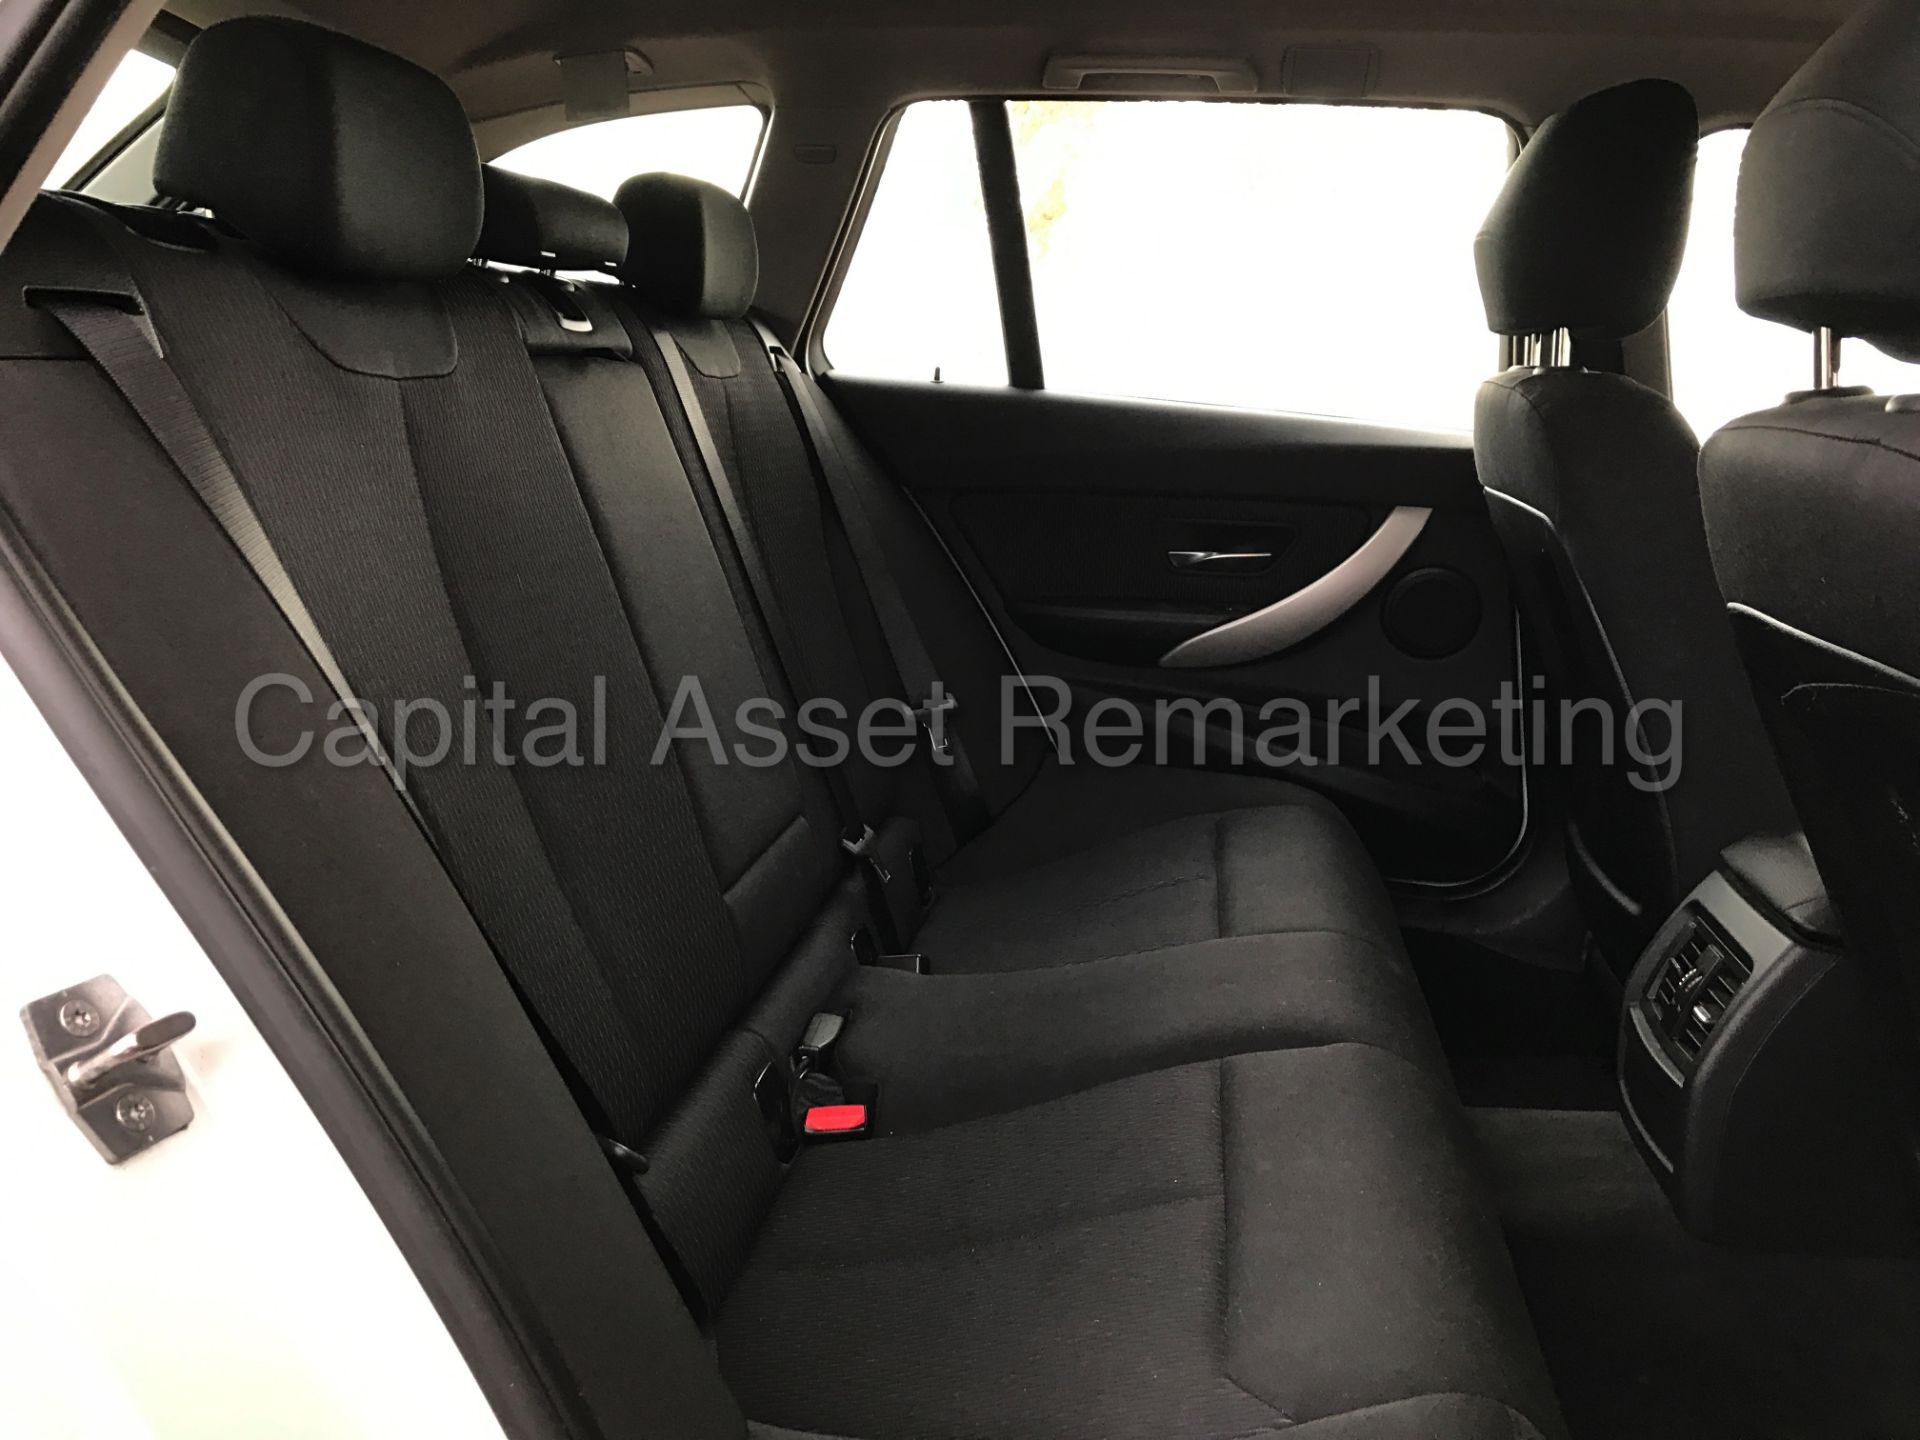 BMW 320d 'ESTATE / TOURING' (2014 MODEL) 8 SPEED AUTO - SAT NAV **FULLY LOADED** (1 OWNER FROM NEW) - Image 15 of 25